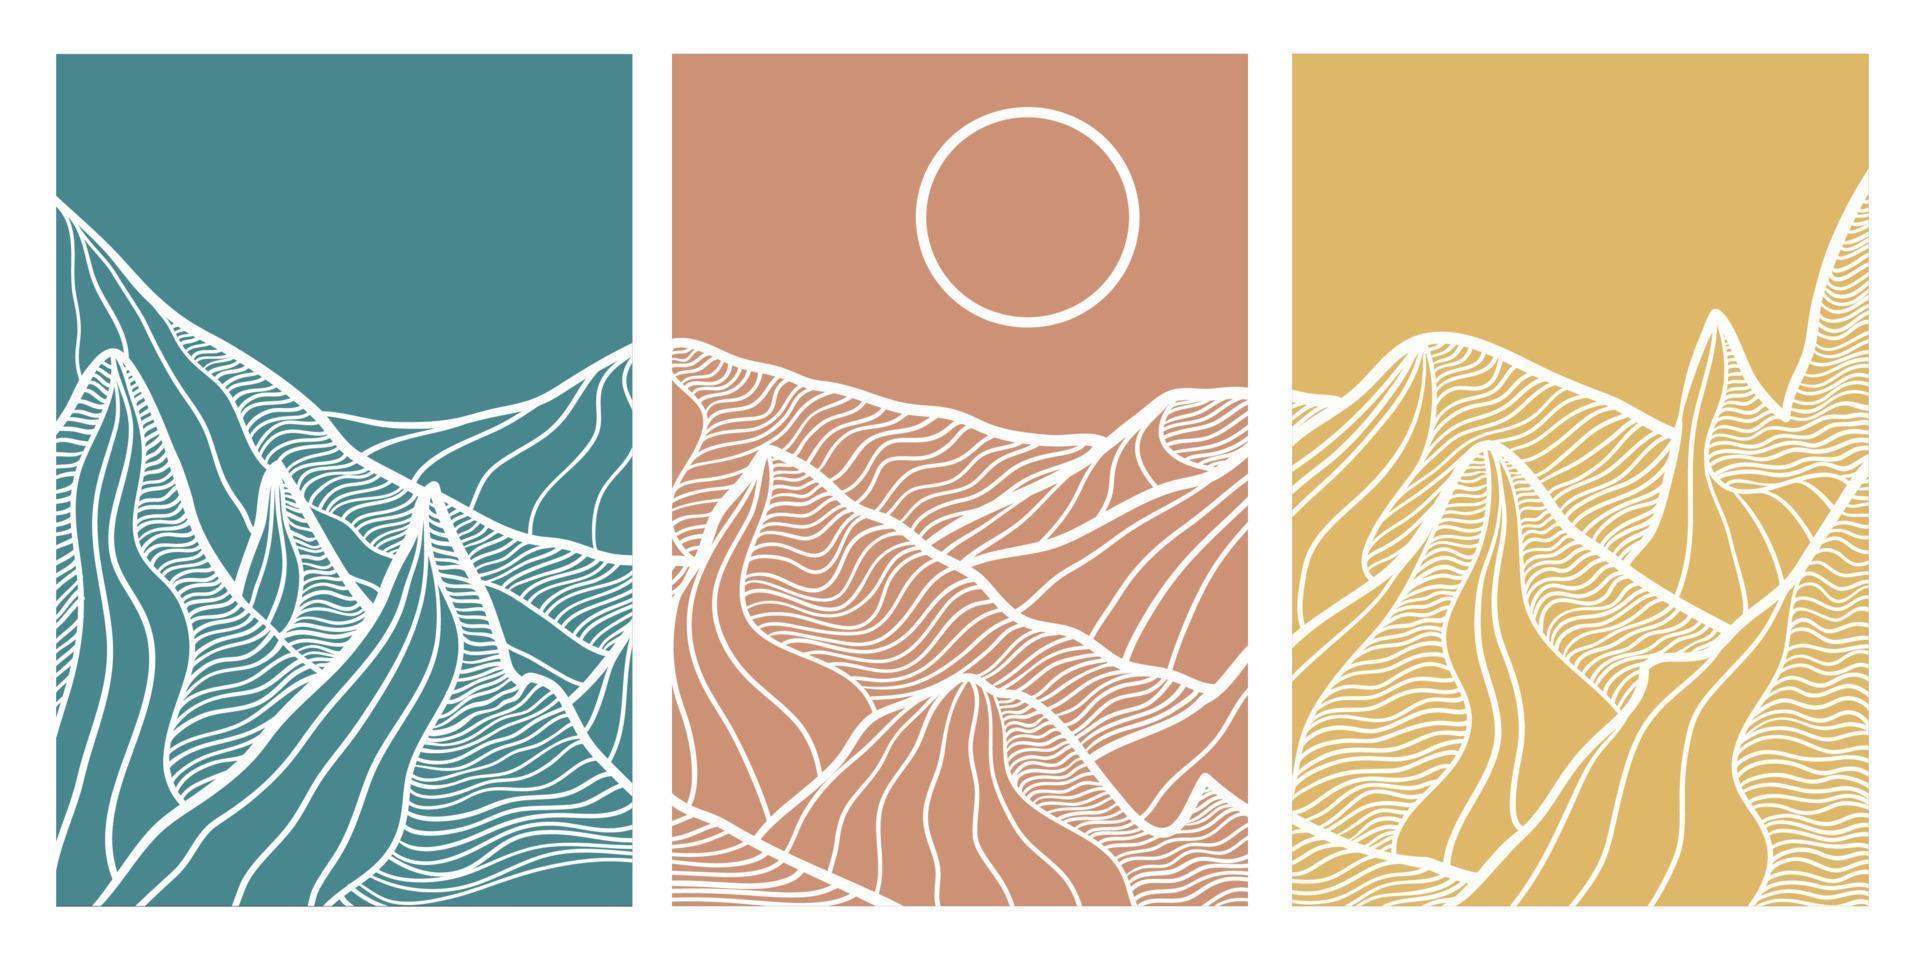 Vector line art of mountains. Color background. Vector illustration of minimal wireframe monotonous line wallpaper.